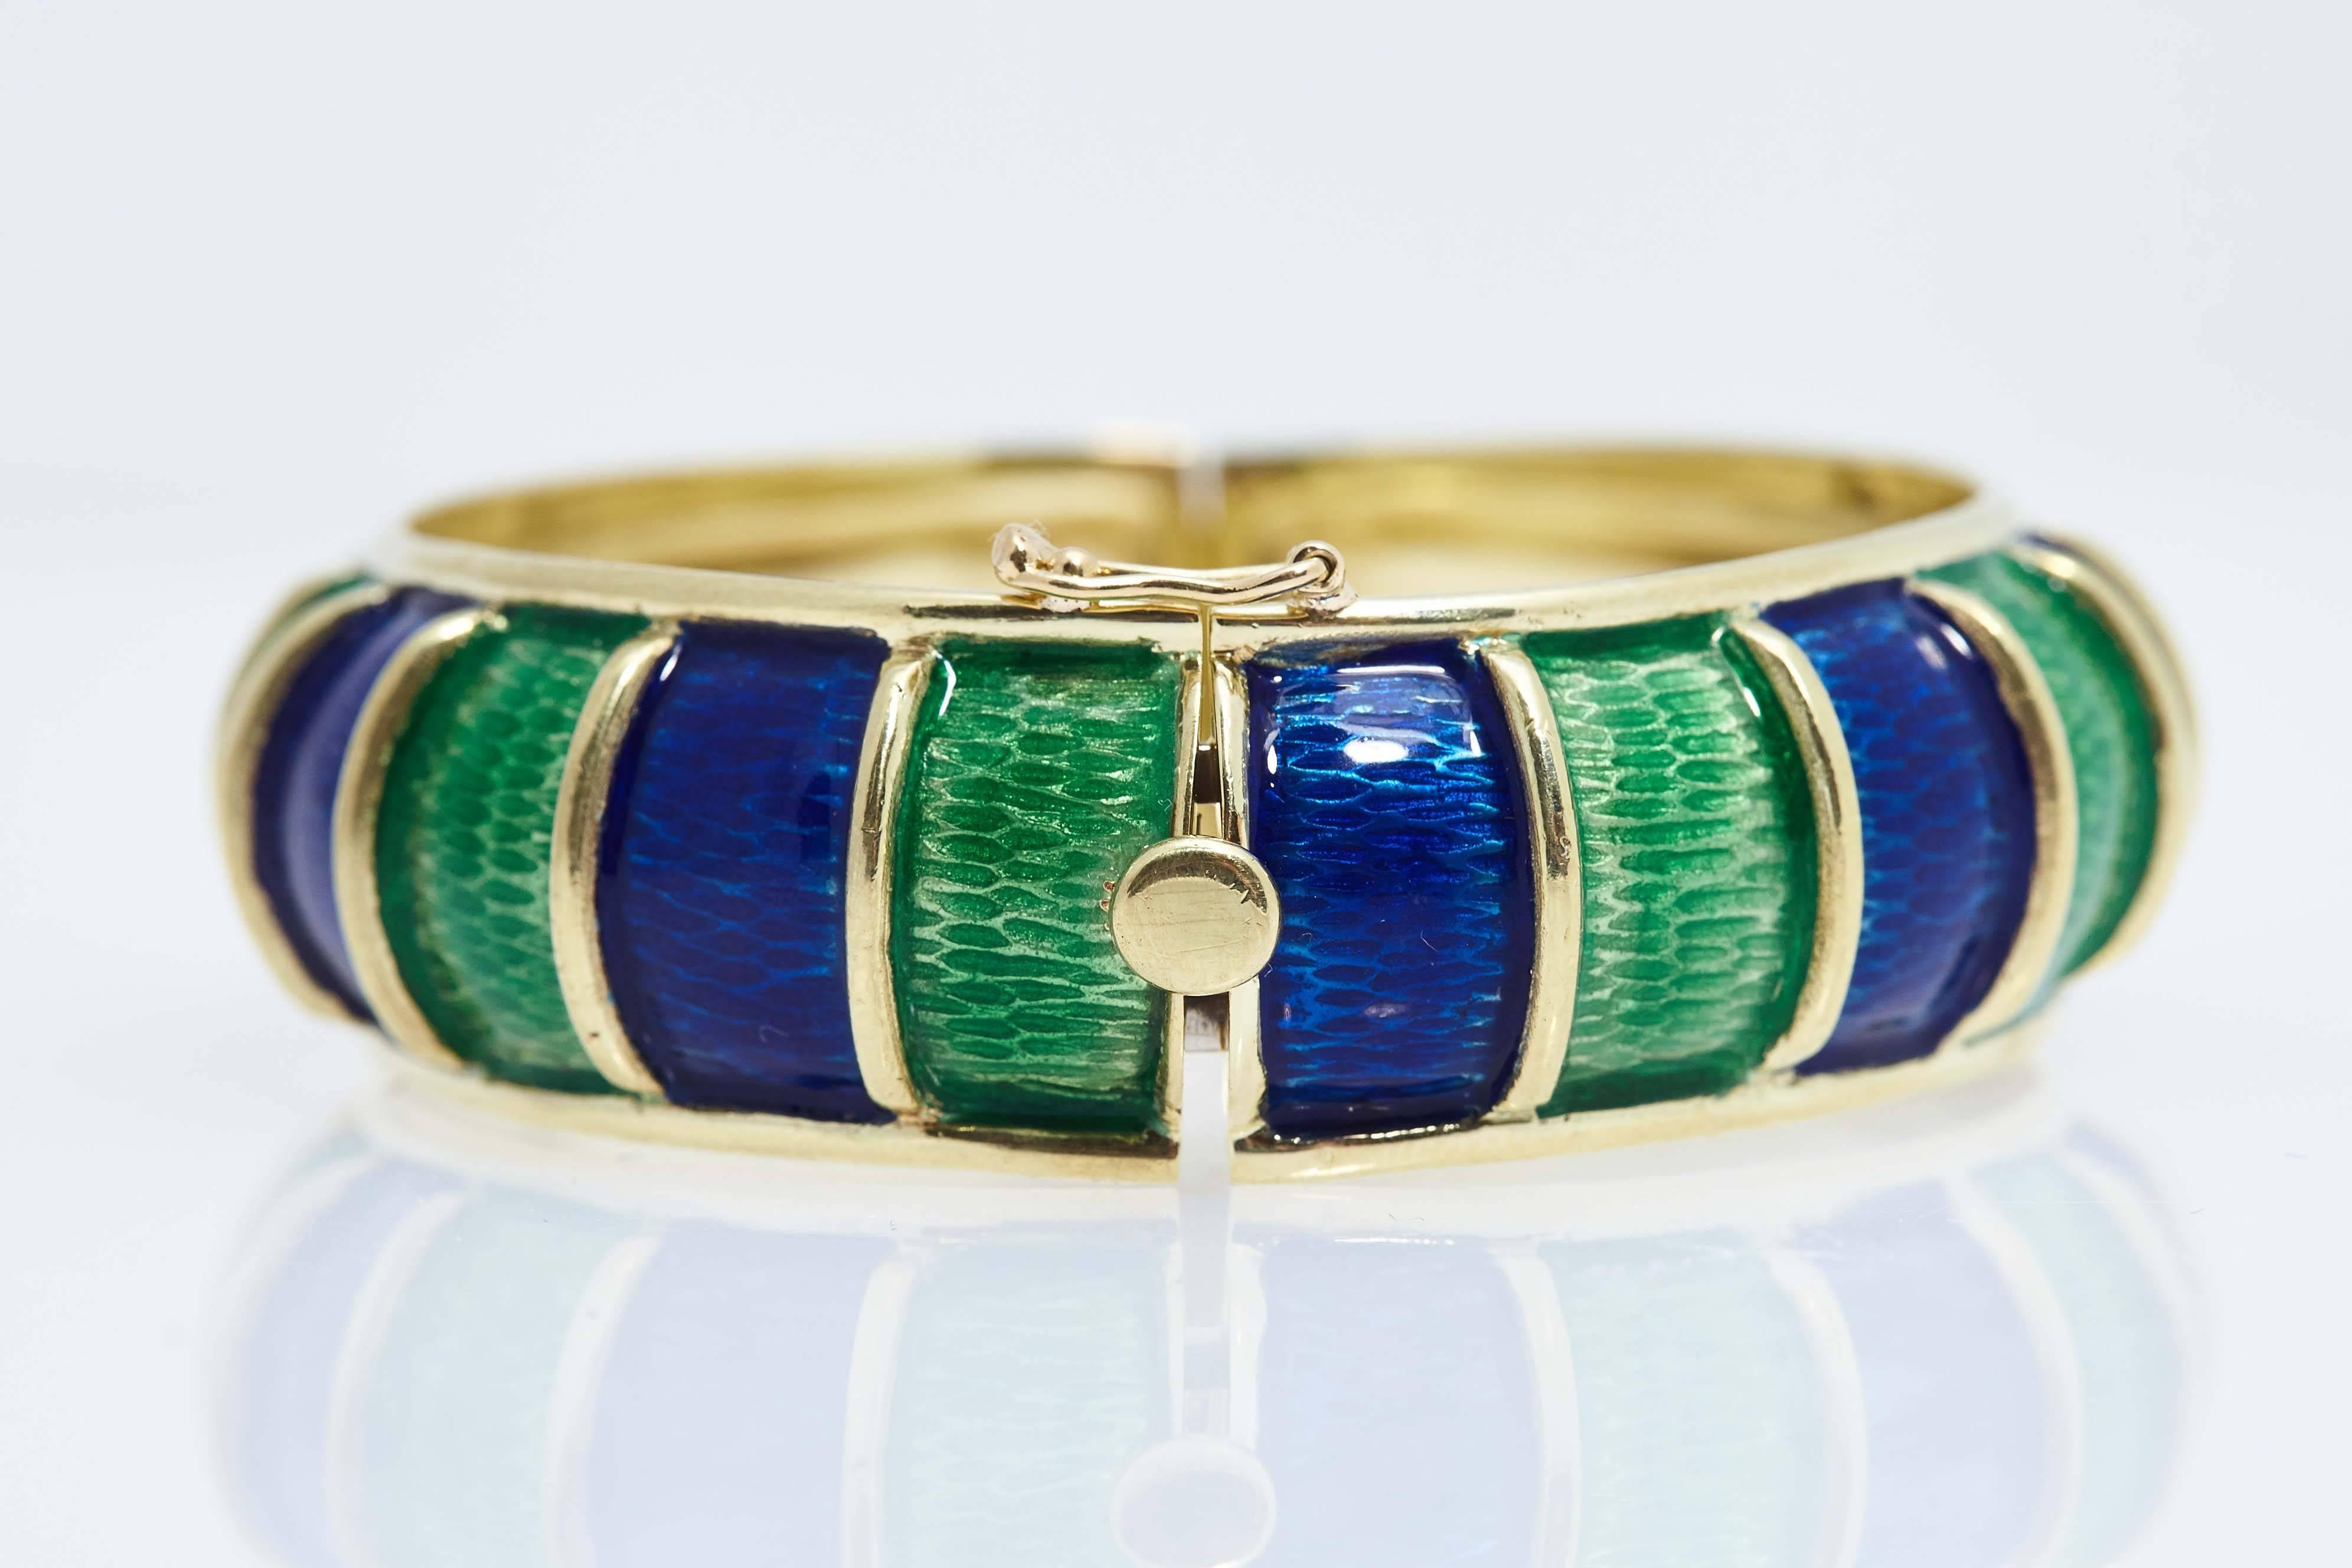 Cellino blue and green enamel bangle in eighteen karat yellow gold. The bangle will fit size is 6 3/4" wrist. The piece is marked "Cellino" and "18k".  The piece is  2 5/8 inches wide.